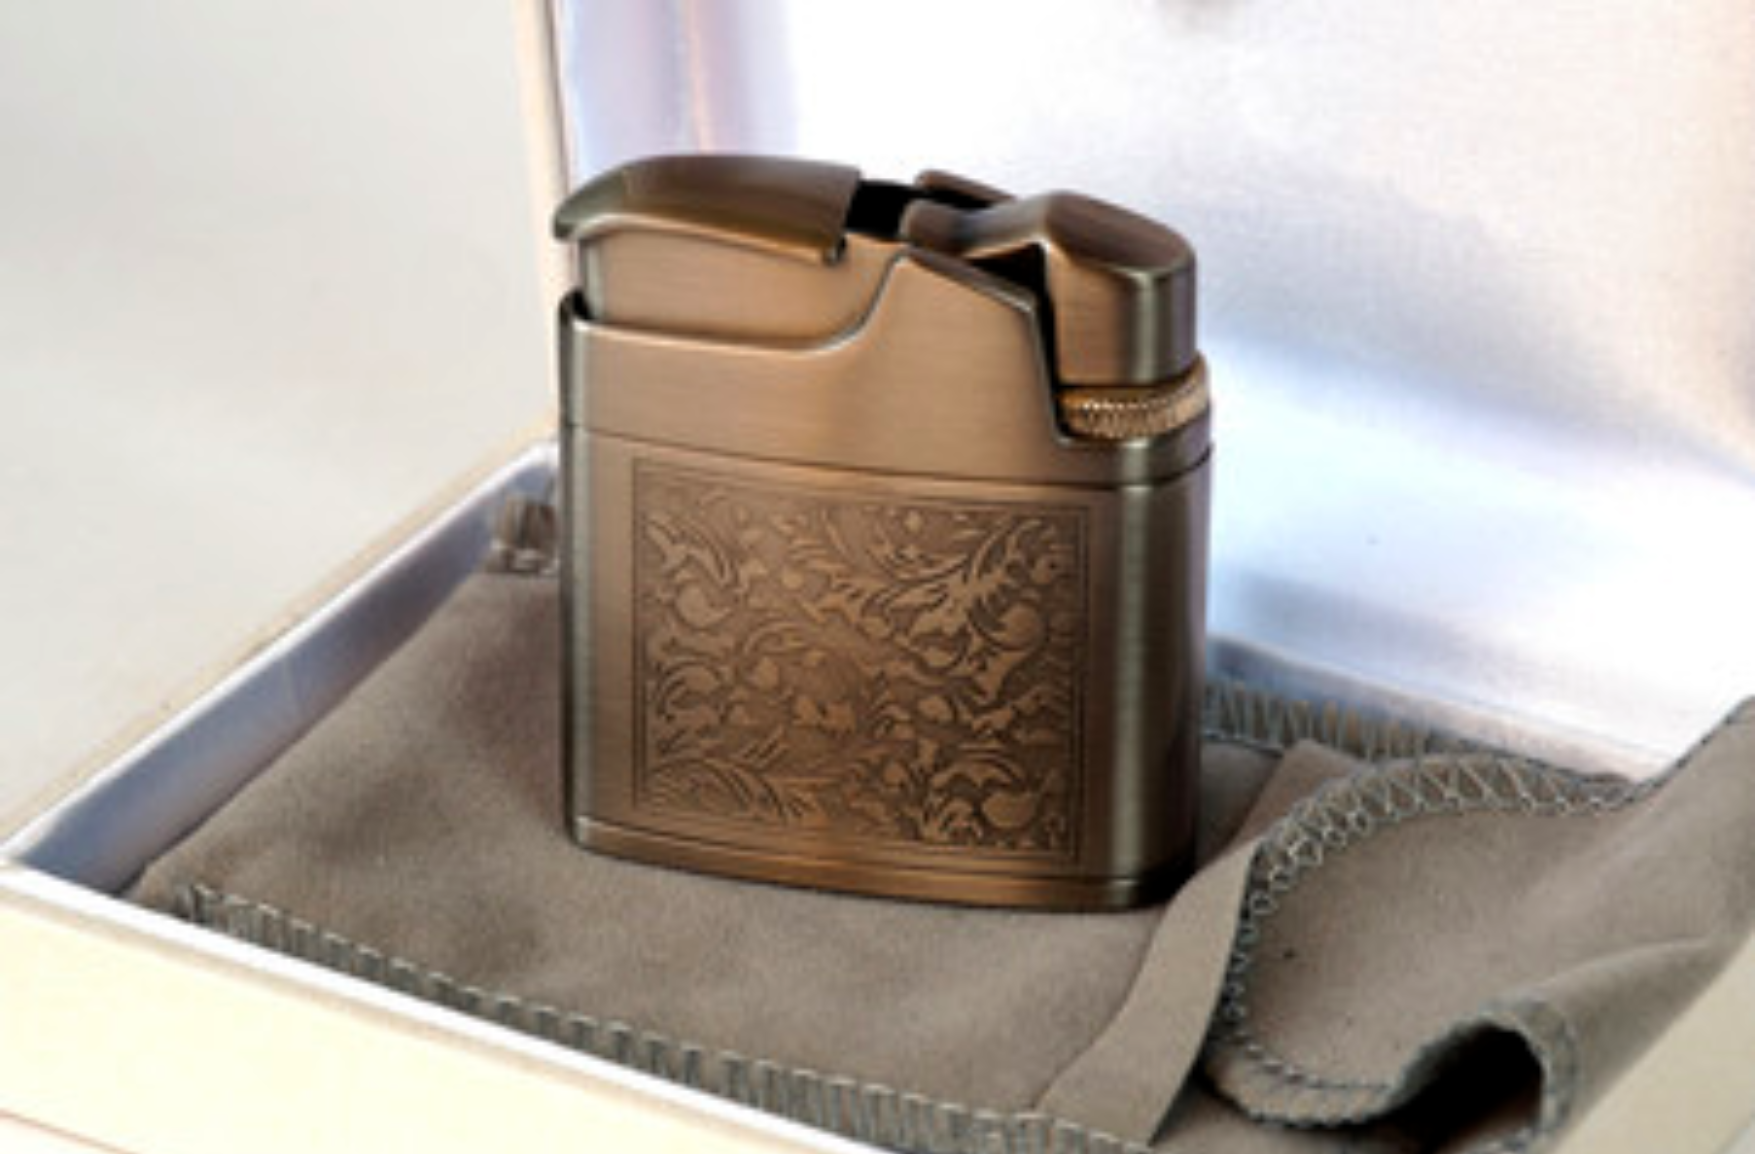 An Image of a Metal Lighter with Engravings